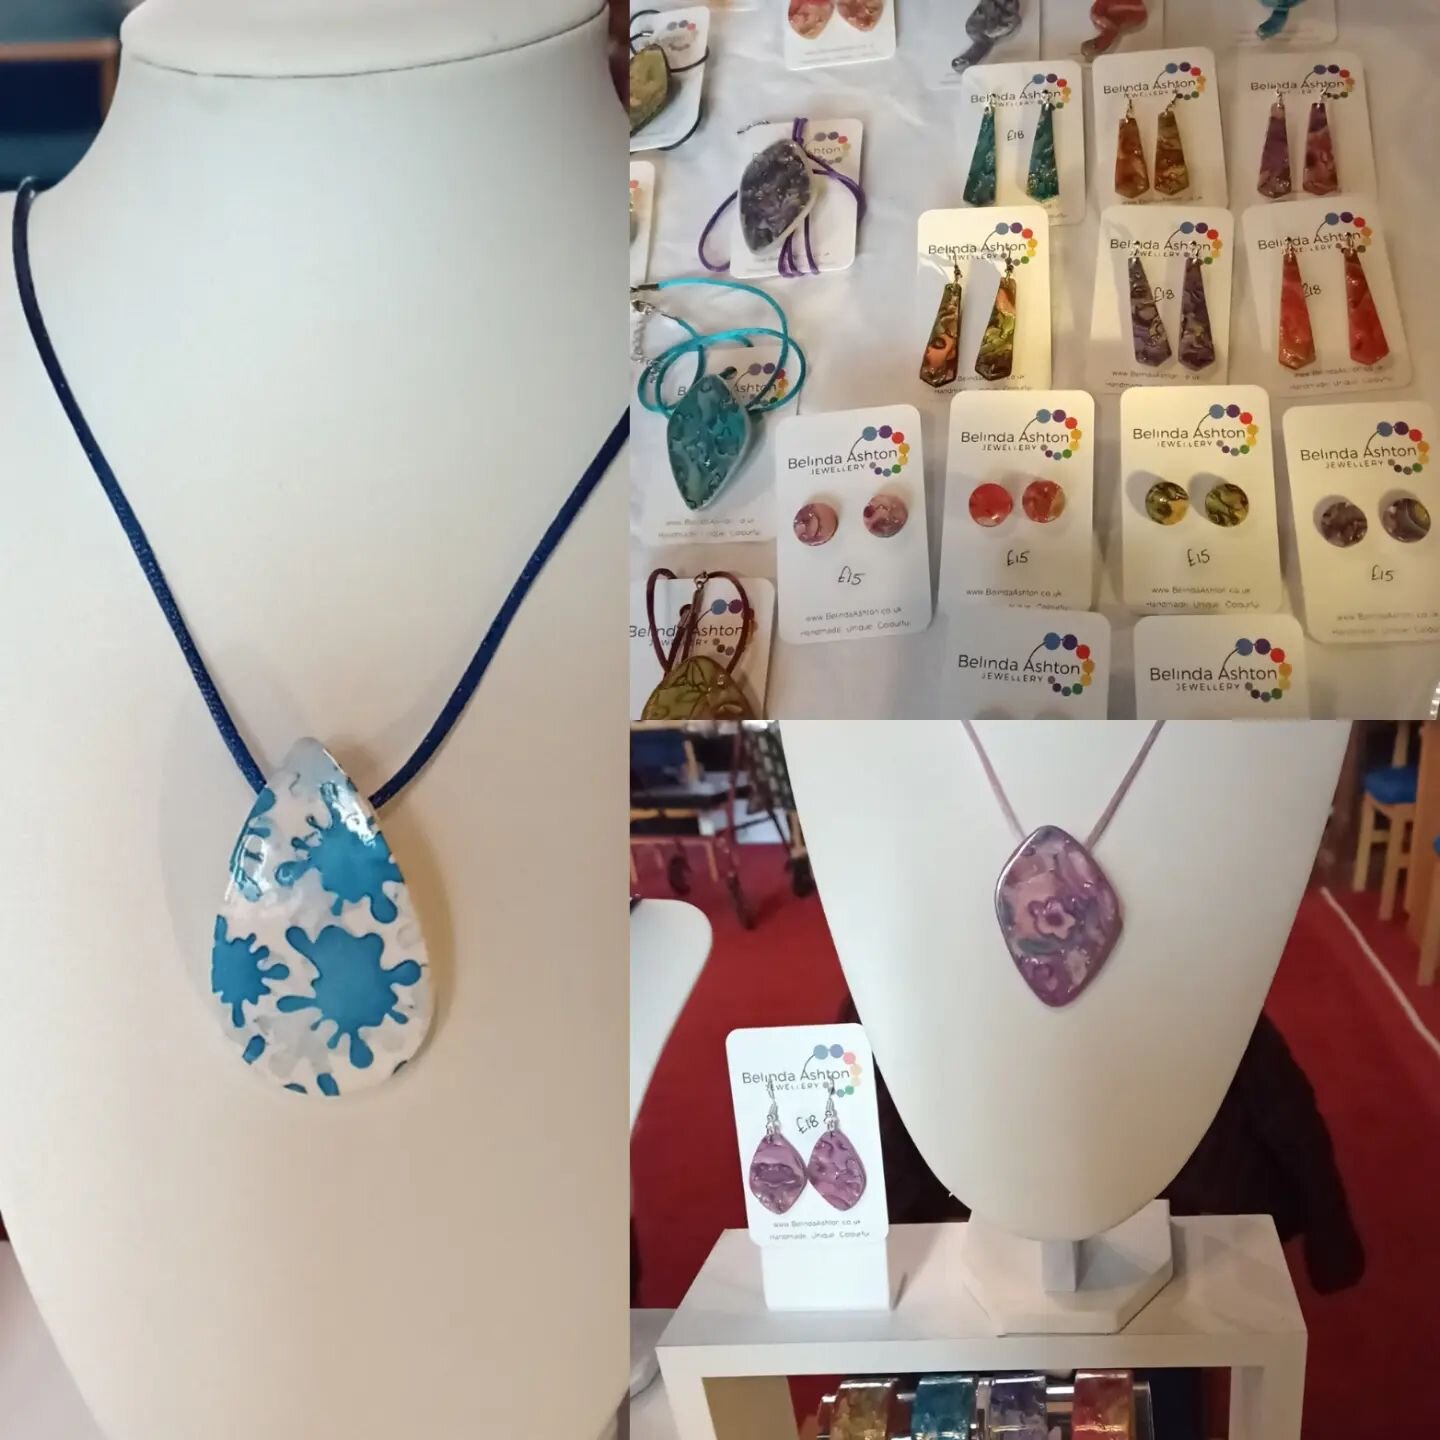 First event of 2024 at St Margaret's Church, Leiston, open until 2pm today 2nd March. 
More than 20 stalls and refreshments.

#leistonsuffolk #suffolkcoast #leistonevents #handmadejewellery #polymerclayjewellery #polymerclaydesigns #polymerclayearrin